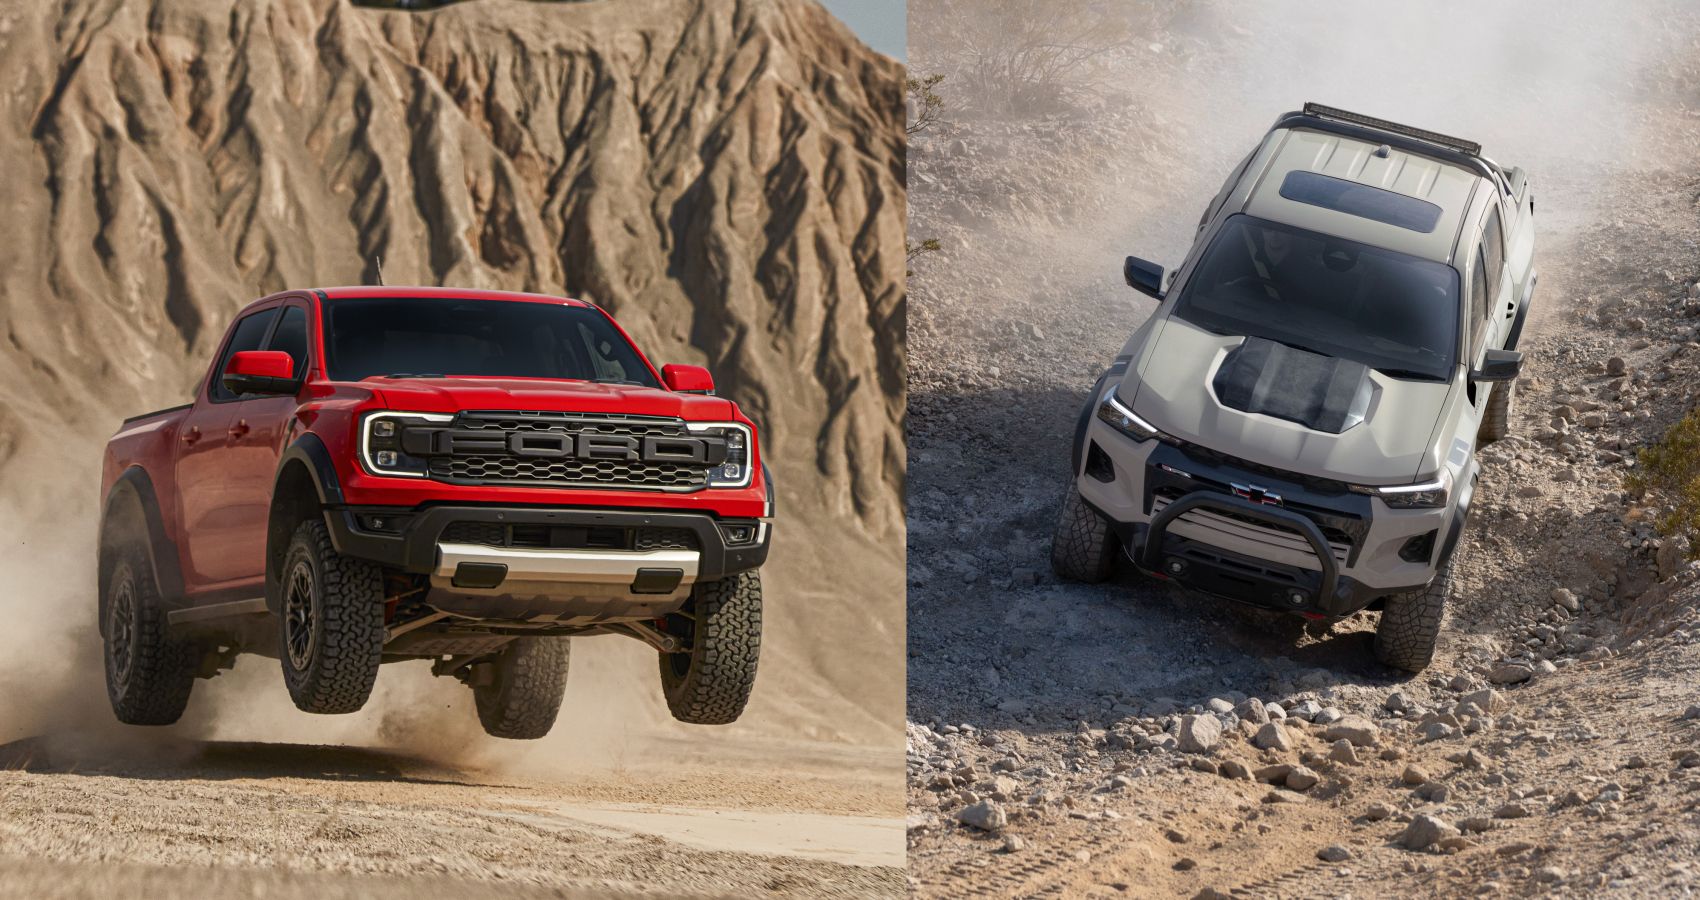 Here’s How The 2023 Chevrolet Colorado Compares To The Ford Ranger